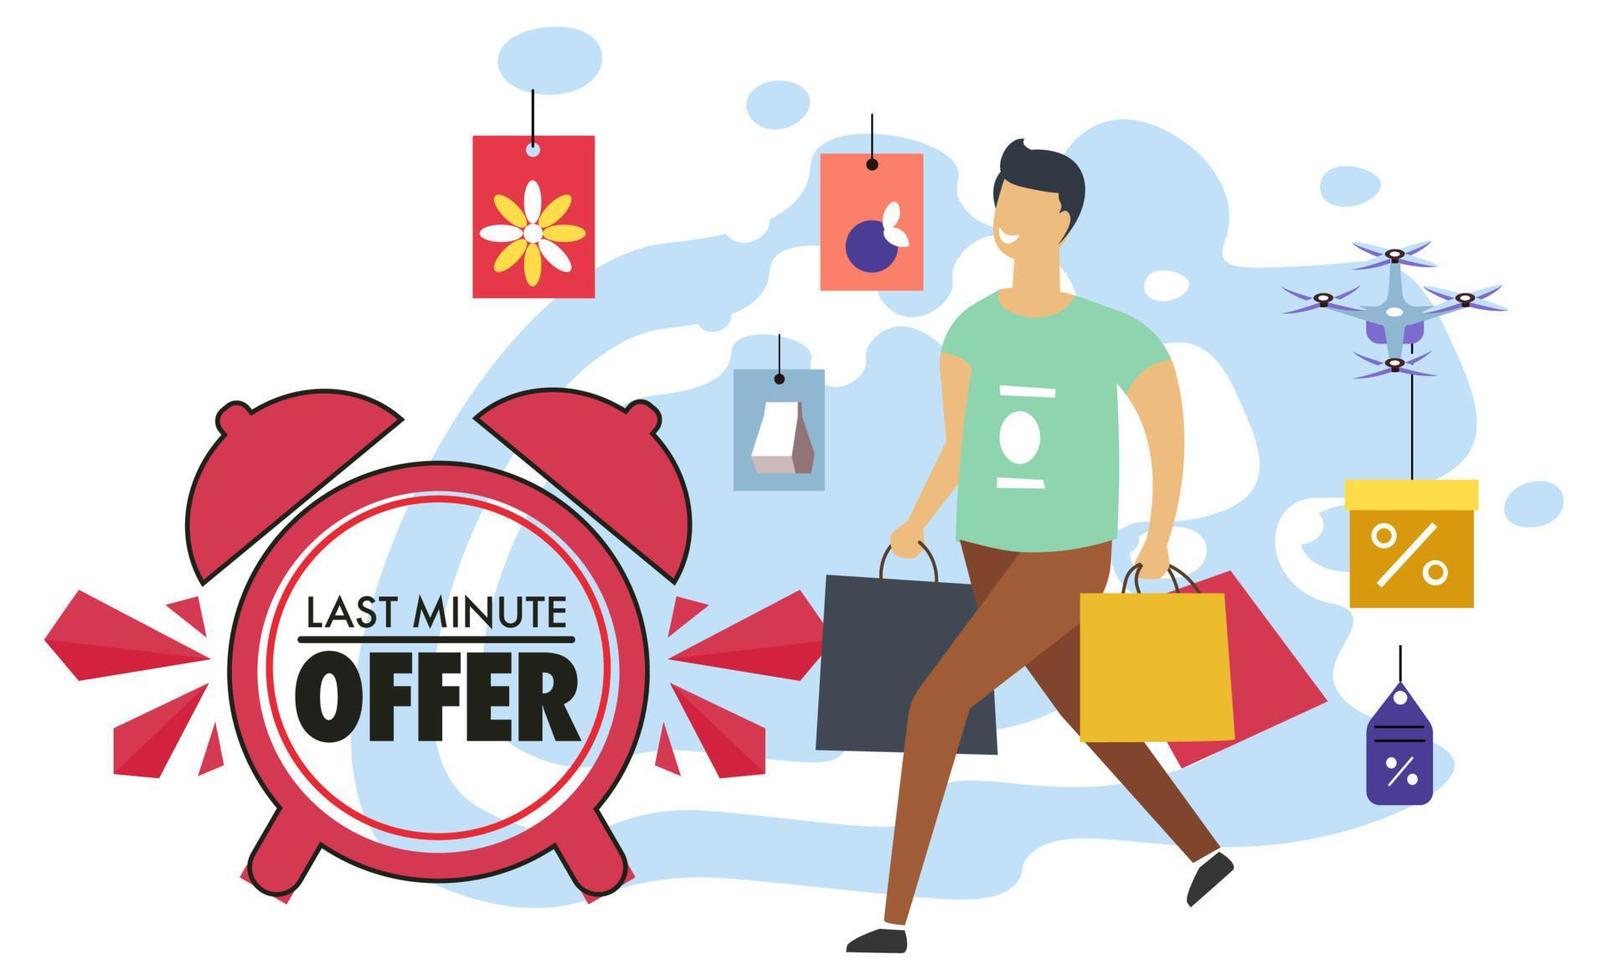 Last minute offer, shopping on sales and discounts vector